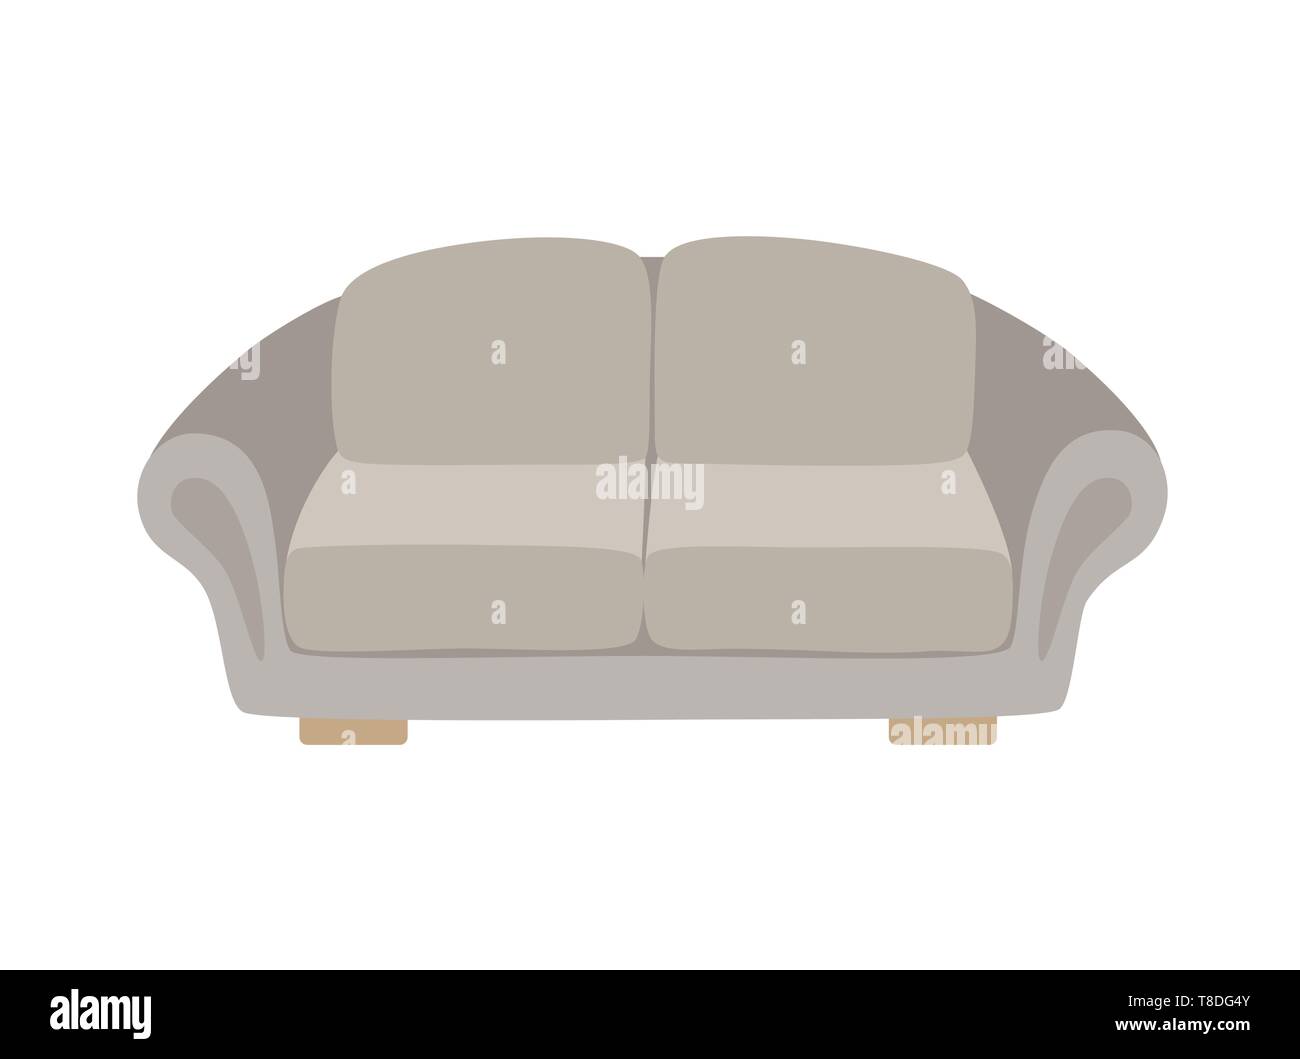 Sofa and couch gray colorful cartoon illustration vector. Comfortable lounge for interior design isolated on white background. Stock Vector